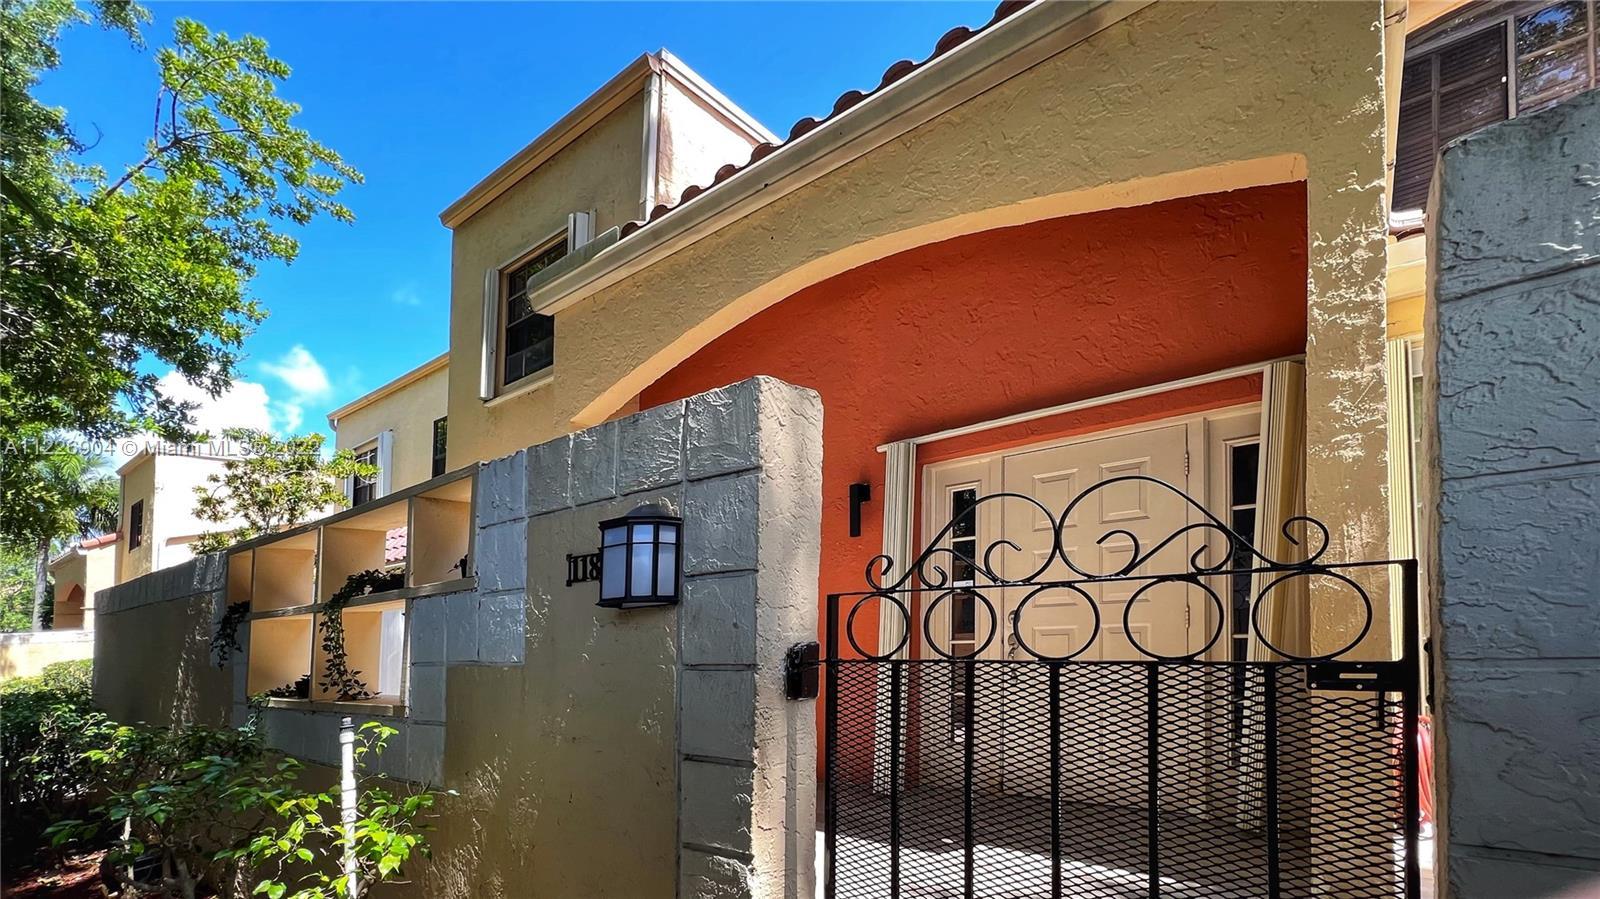 Wonderful Townhome in a desirable community of Mariner Village in Aventura, Remodeled and updated. M